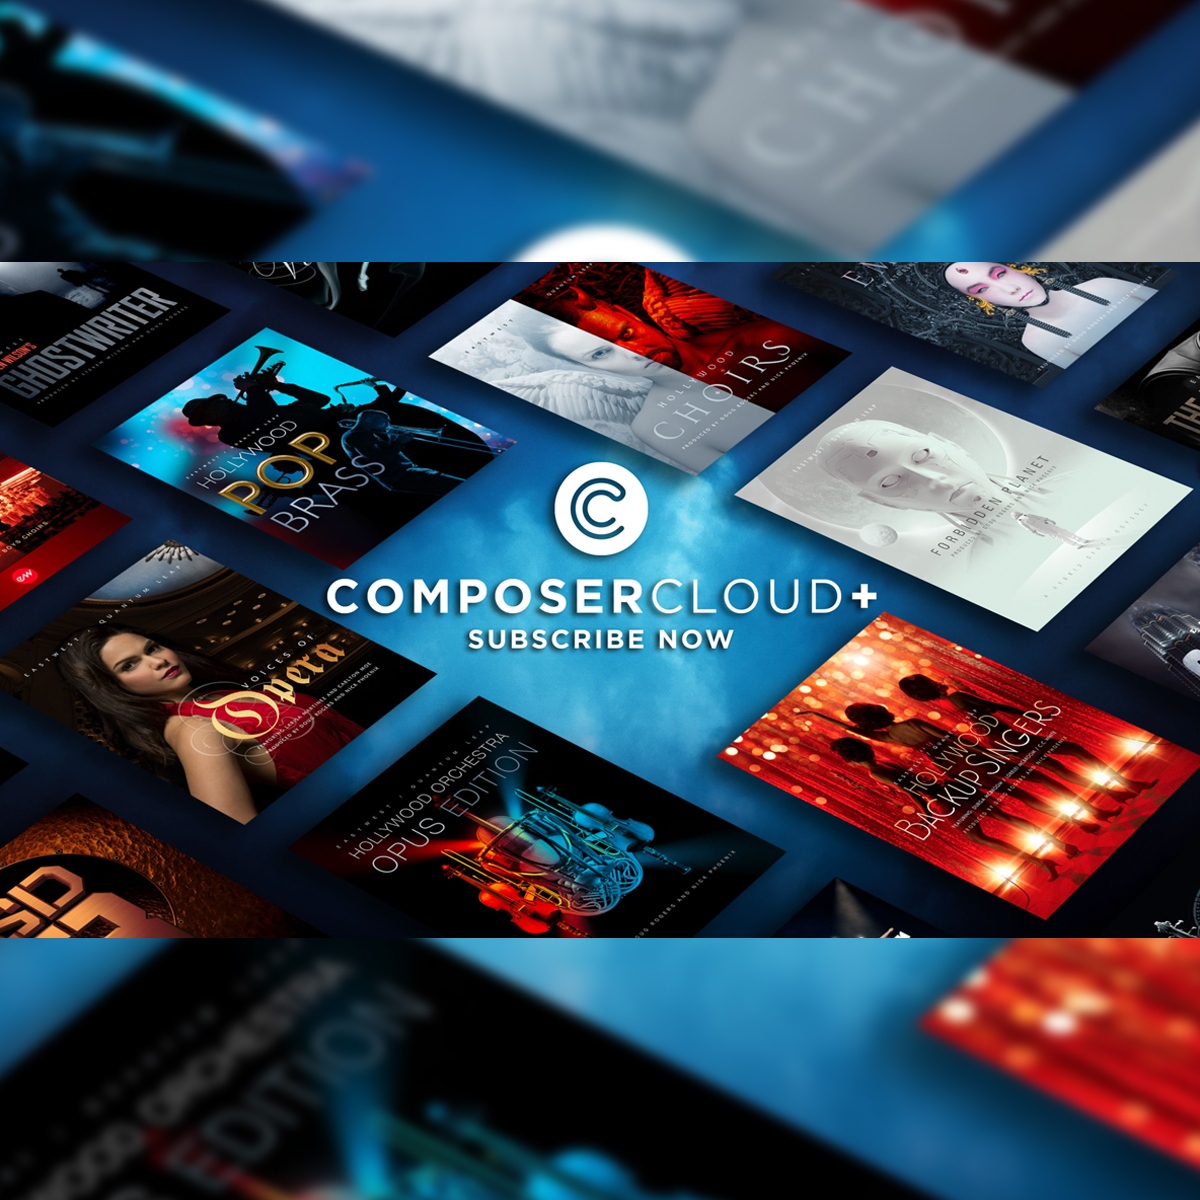 From the 17th November - 1st December, you can get 25% off the EastWest Composer Cloud Plus at Giraffe Audio. Find out more info by following the link here: tinyurl.com/24z9khxp . . . . . #eastwest #eastwestcomposercloudplus #composer #giraffeaudio #birminghammusicscene